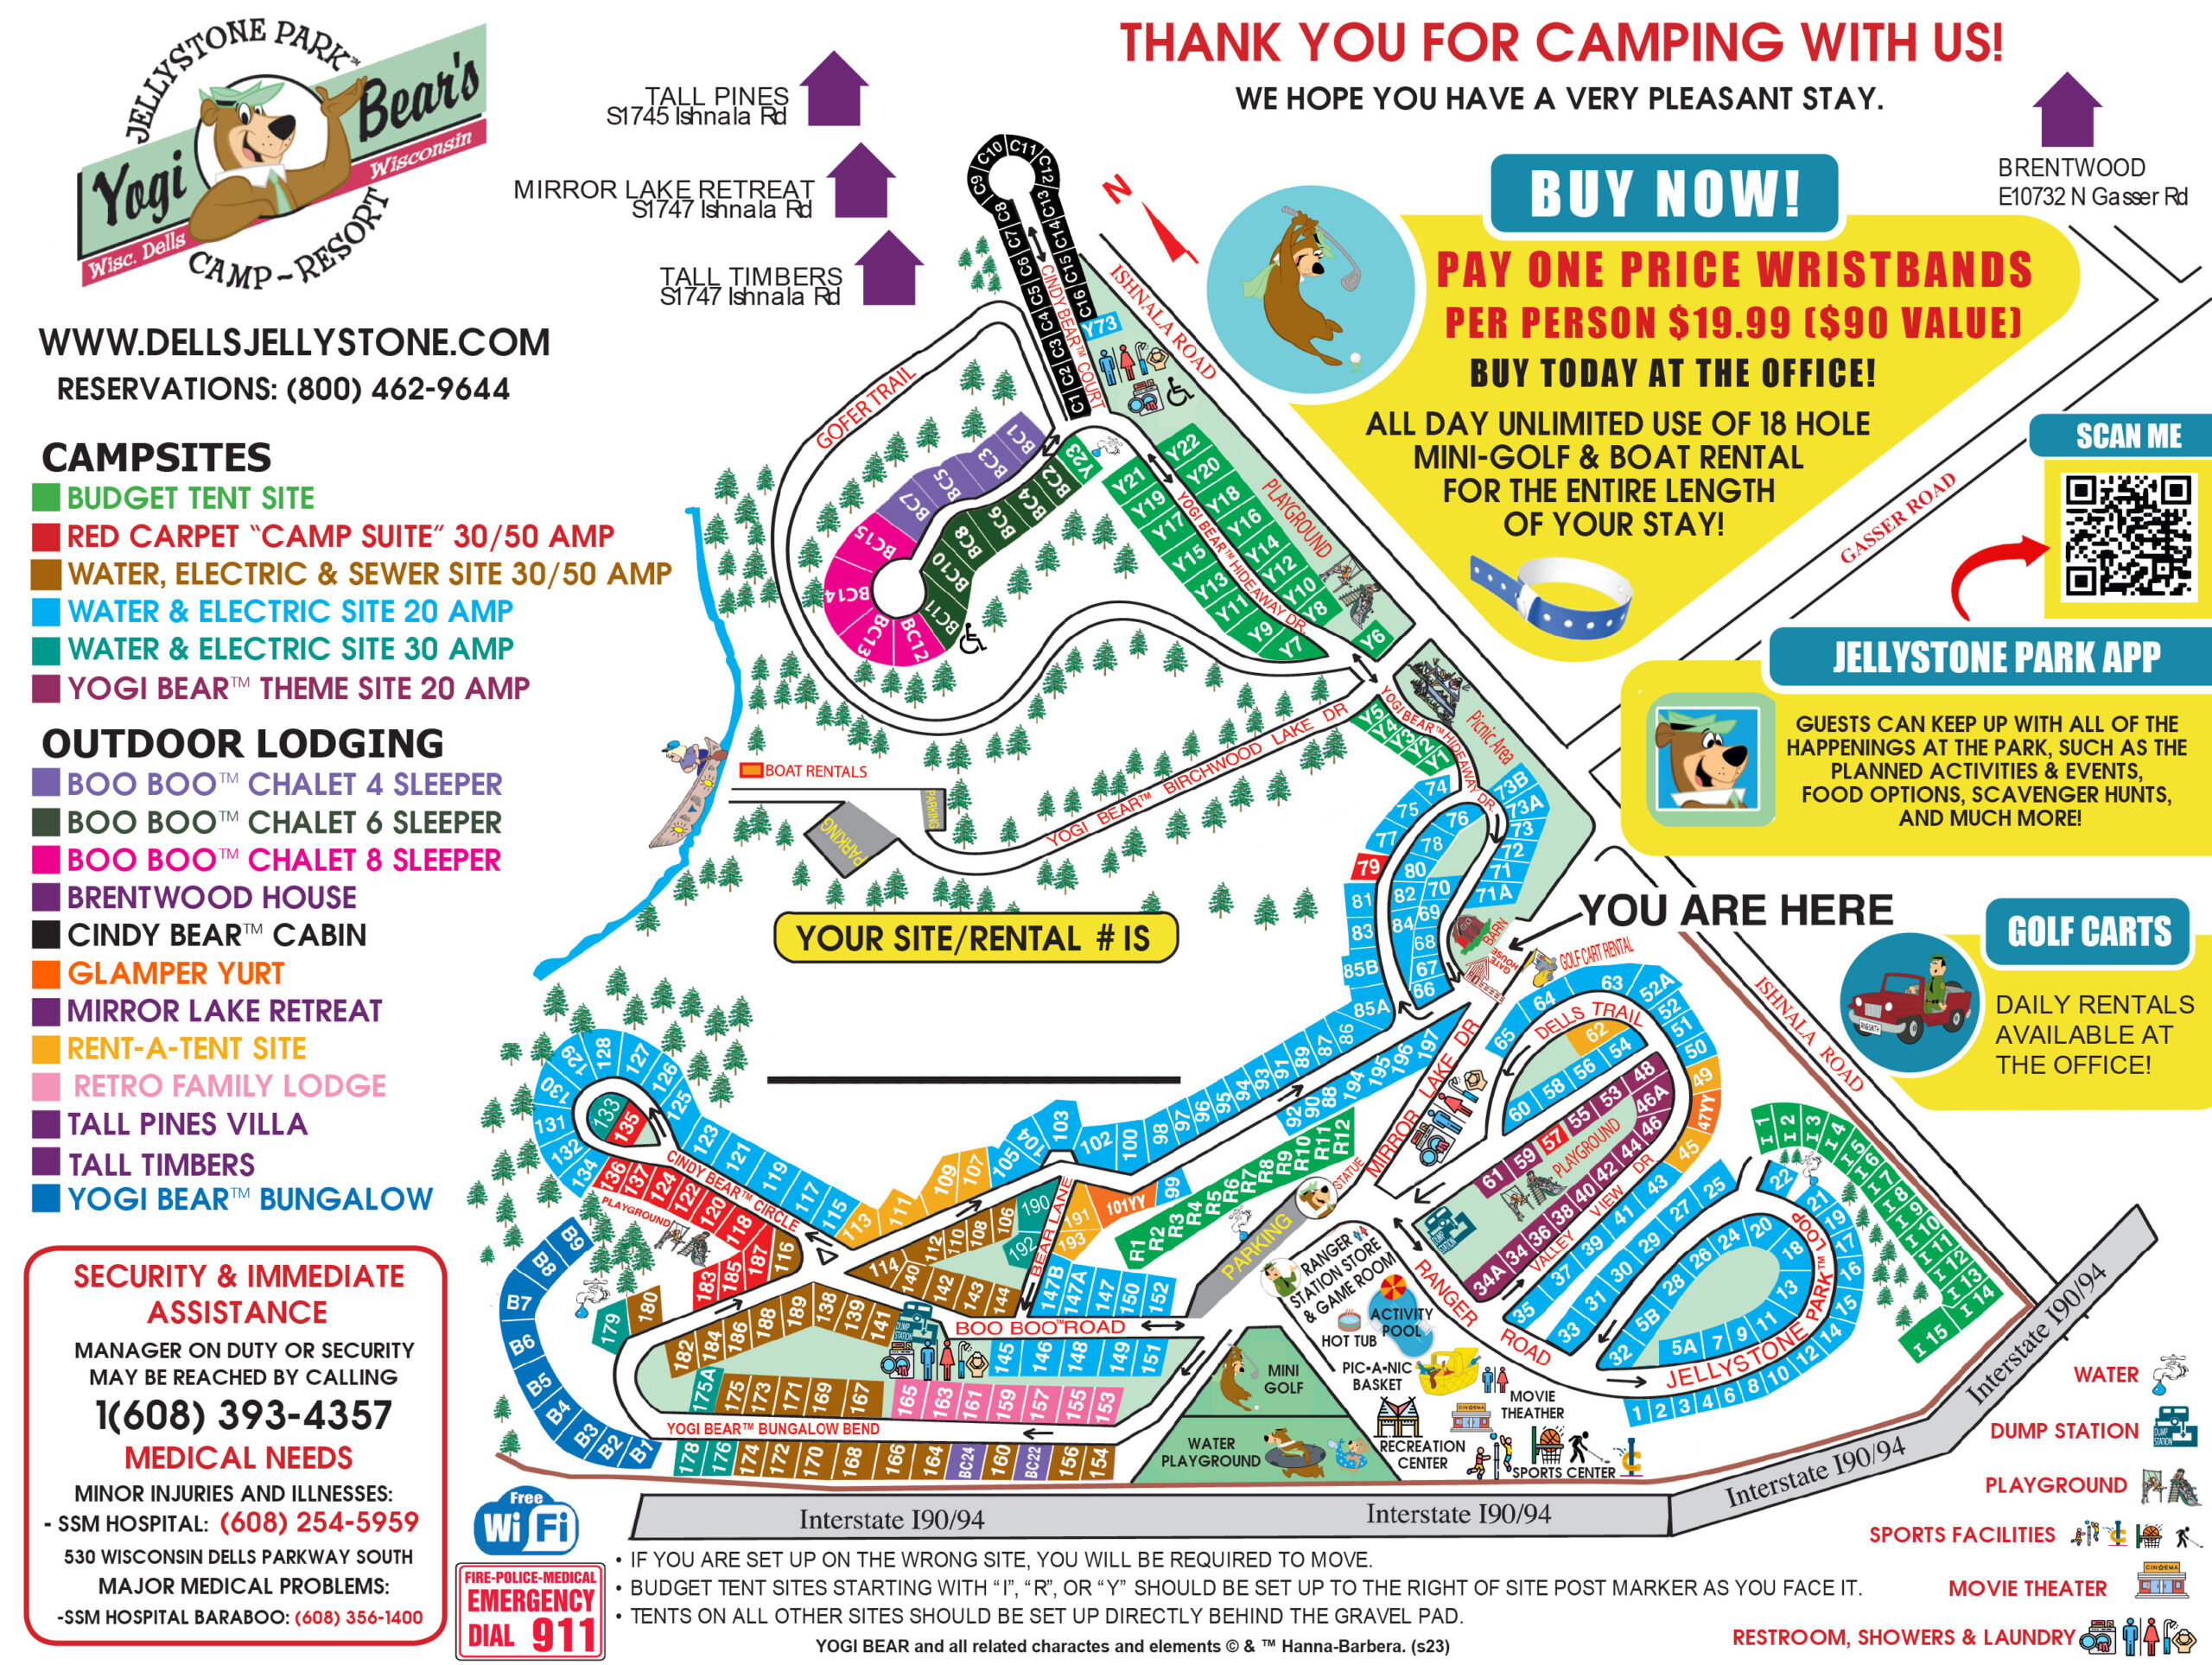 Click here to see larger Resort Map